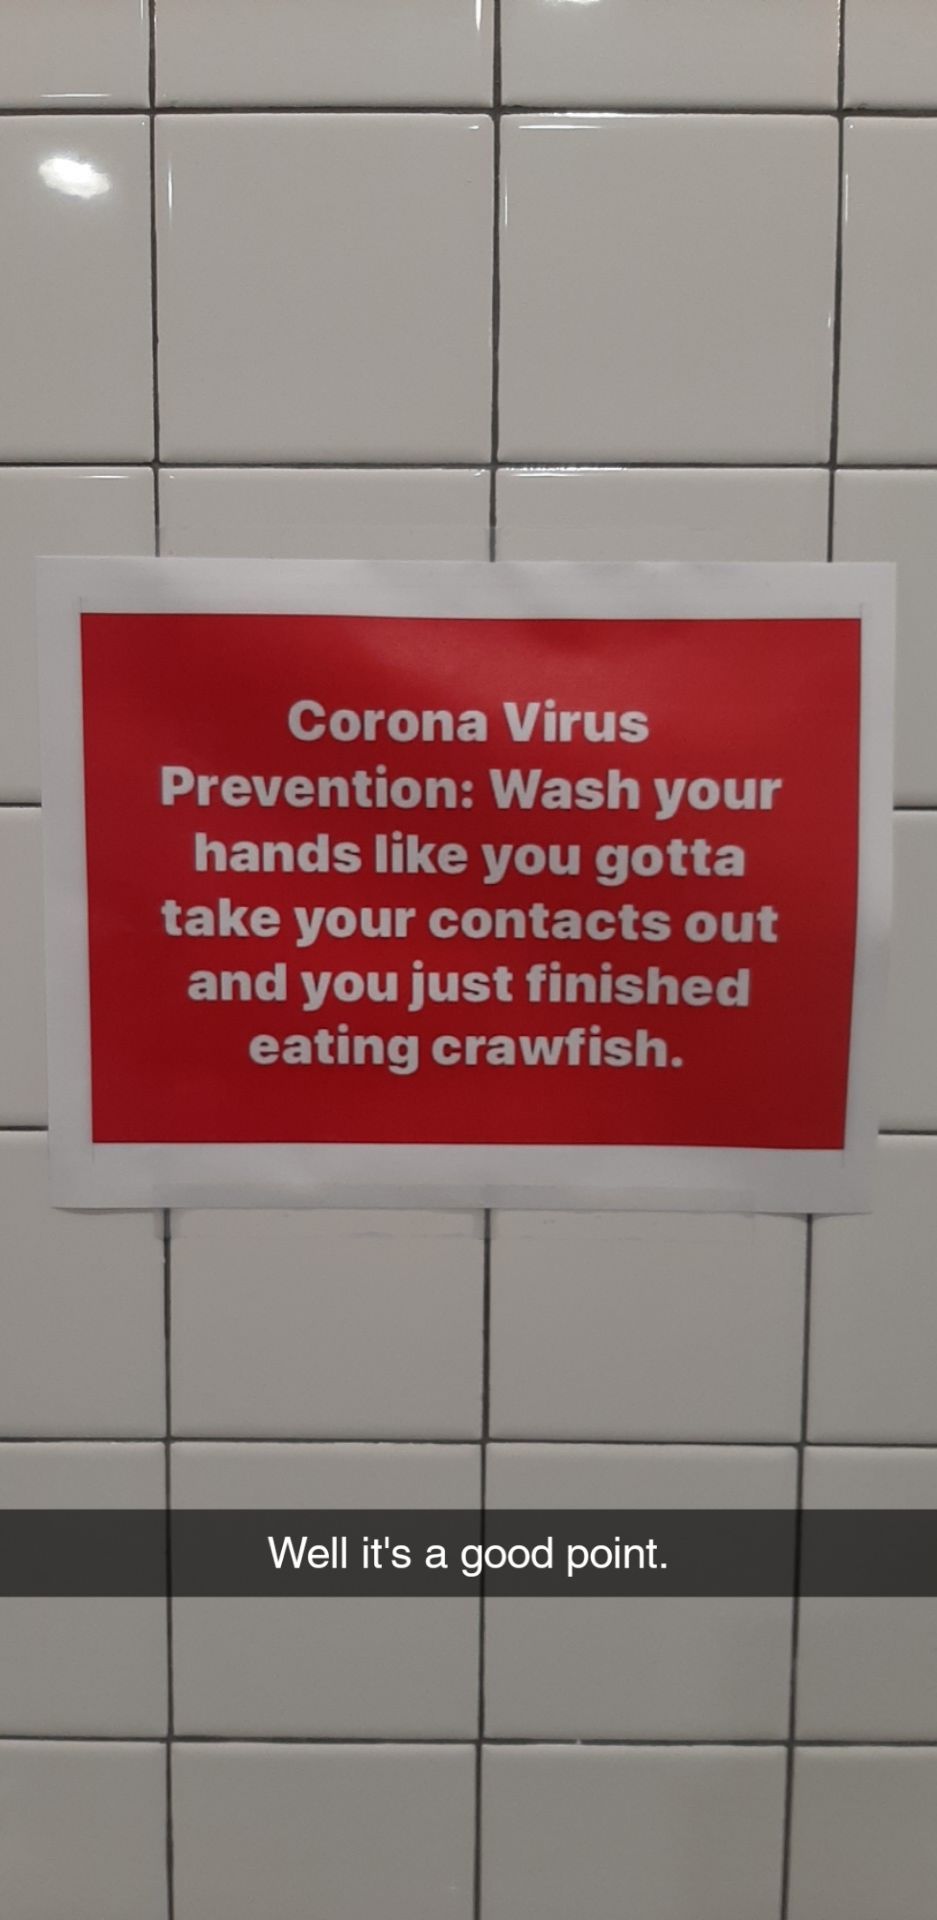 Saw the Texas Coronavirus Prevention sign. So here is one I saw in my work bathroom in Louisiana yesterday!